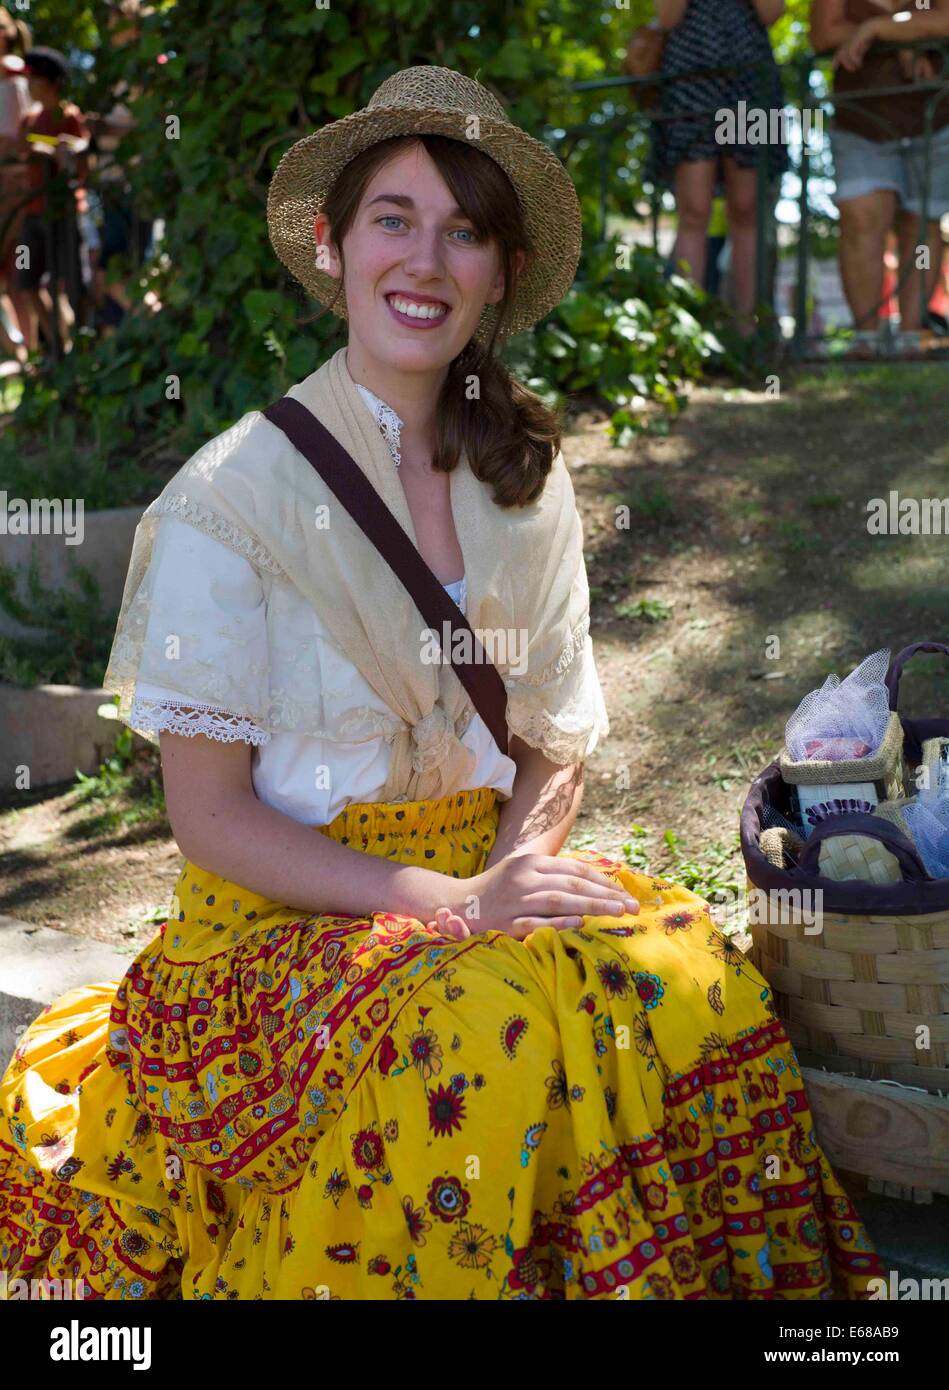 A young French woman poses in traditional Provençal Costume Stock Photo -  Alamy